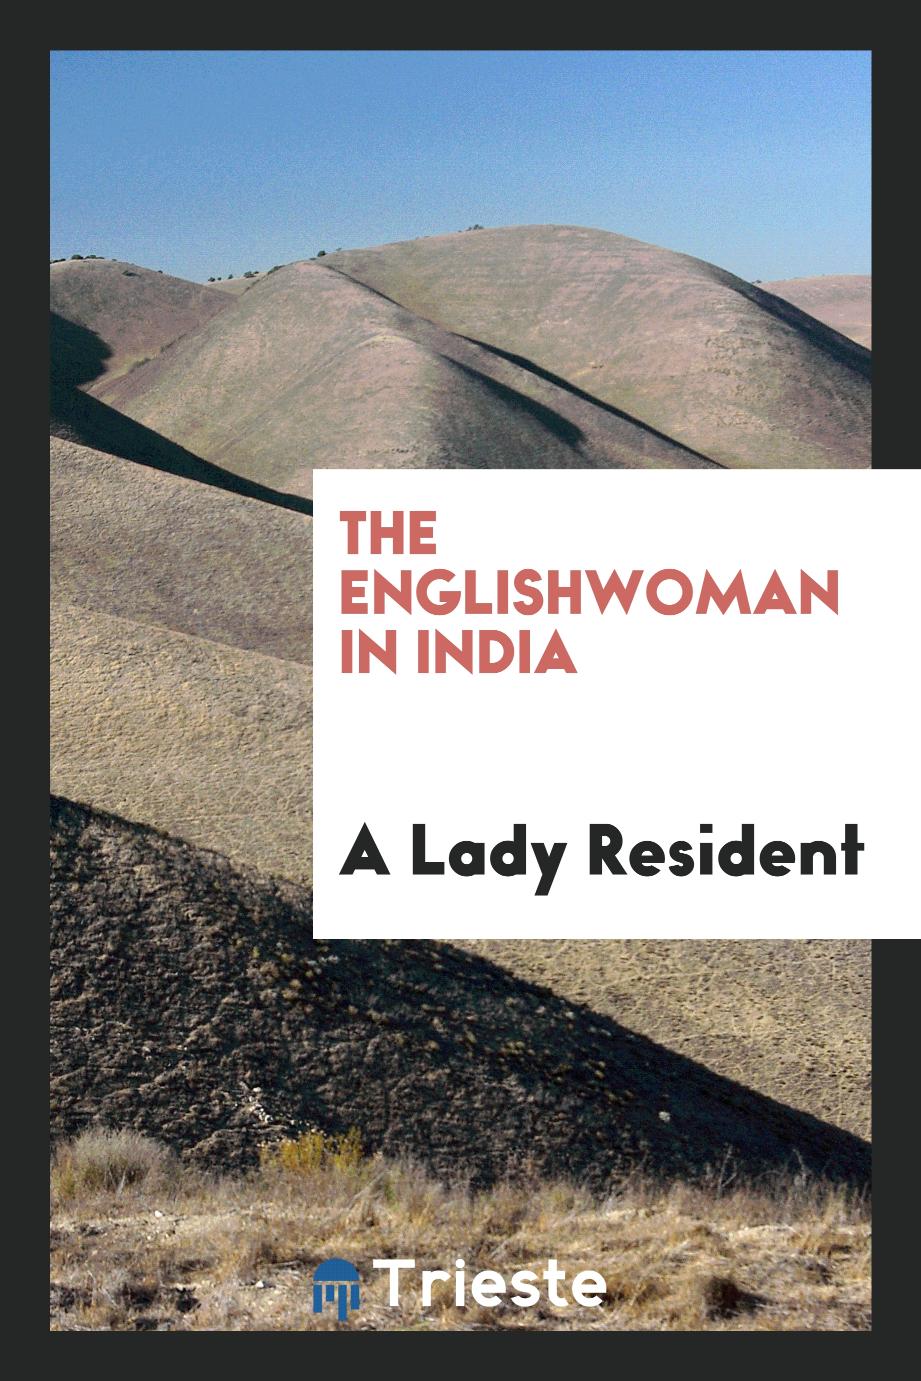 A Lady Resident - The Englishwoman in India